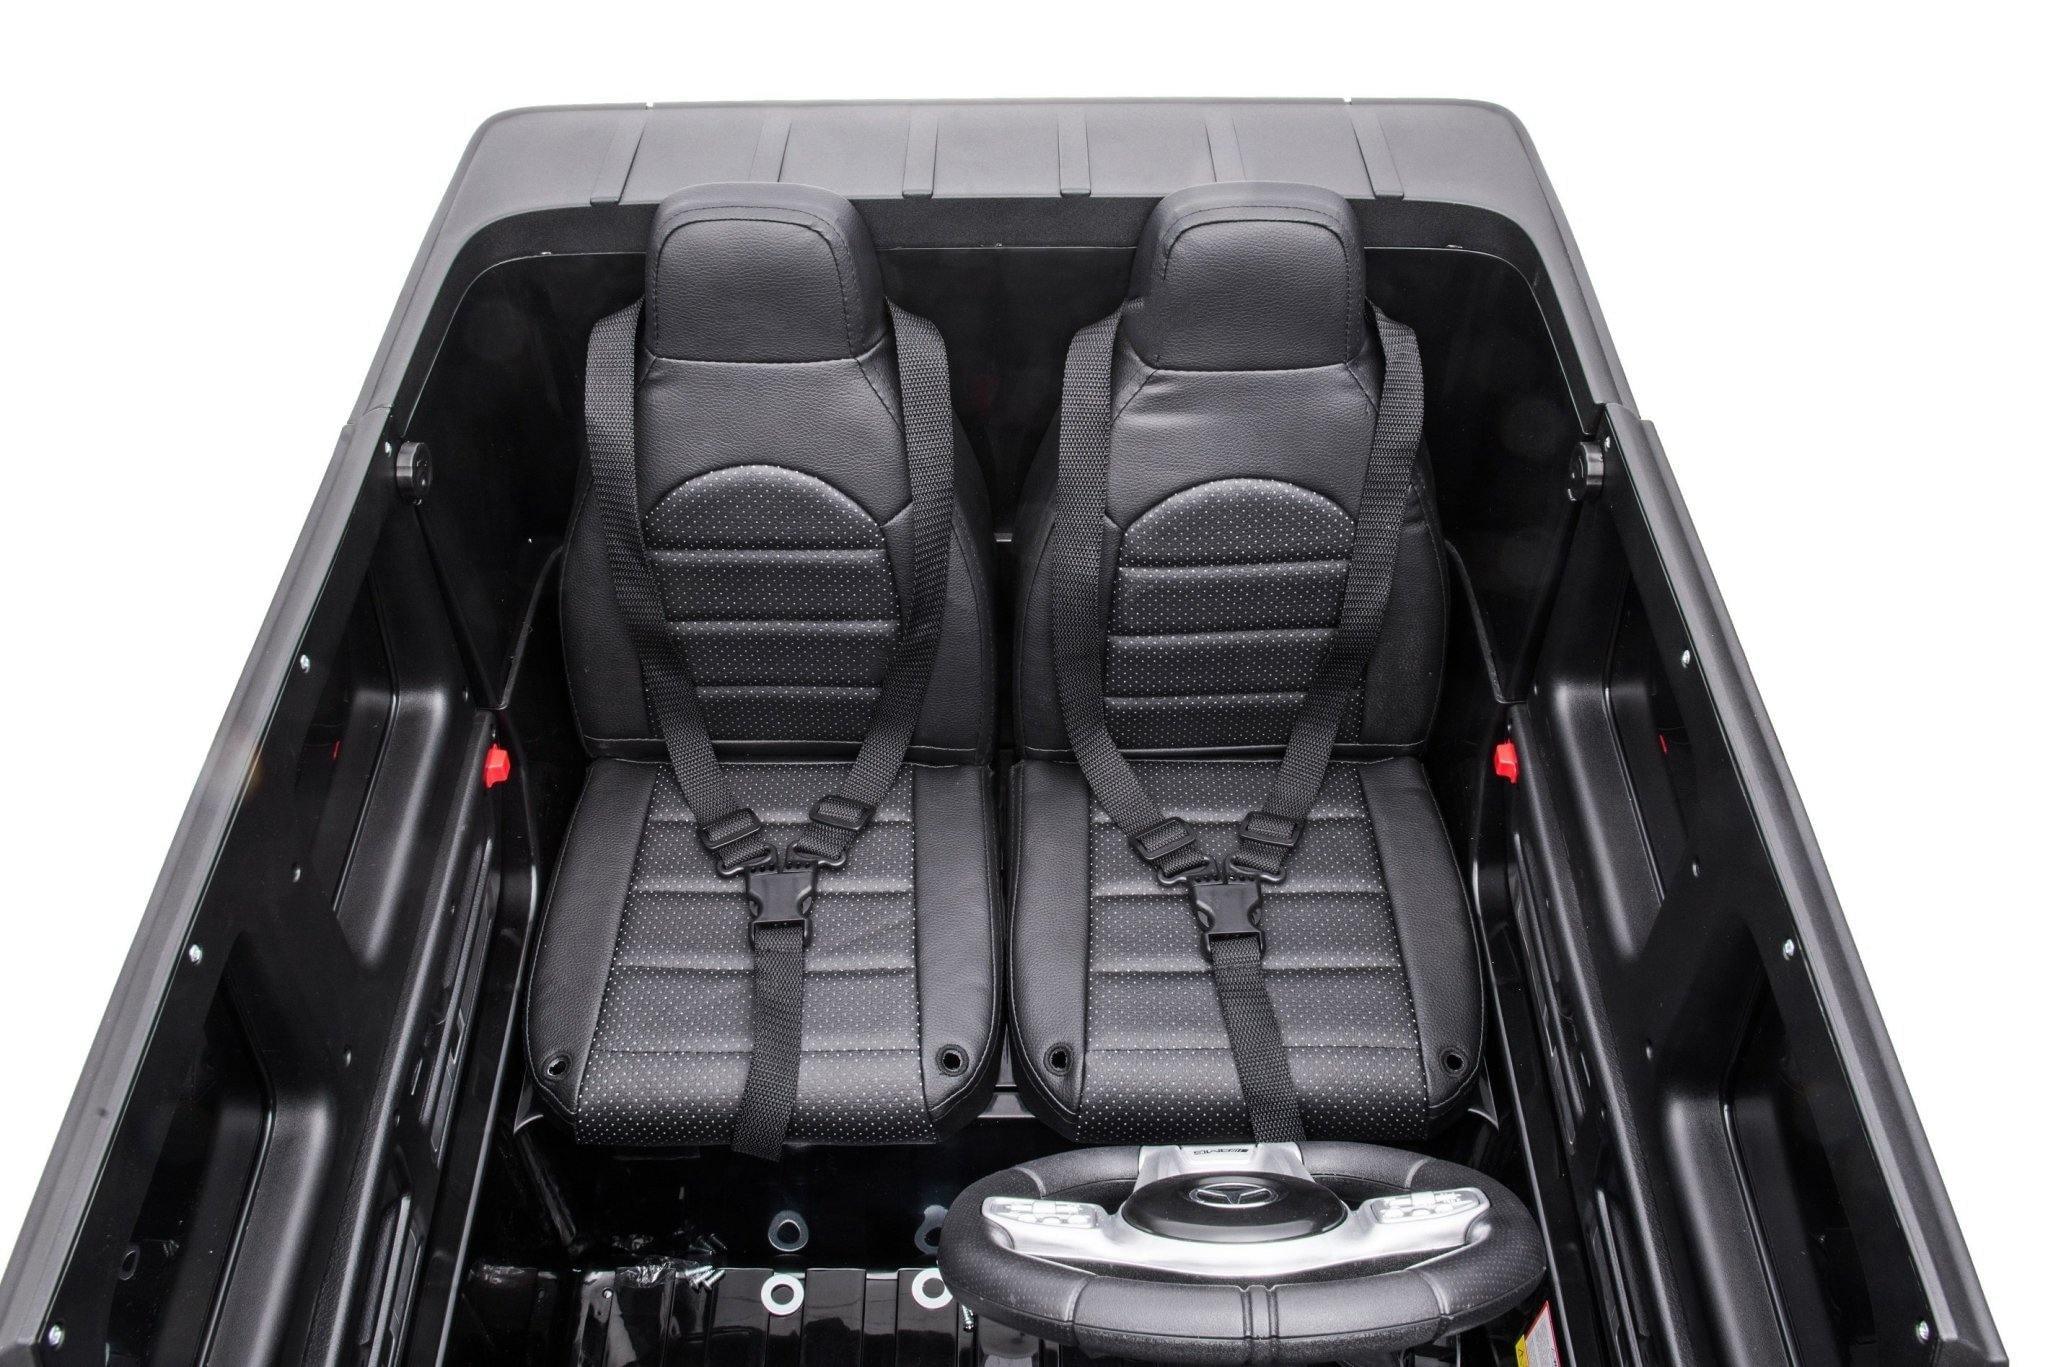 24V 4x4 Mercedes Benz G63 AMG 2 Seater G Wagon Ride on Car - DTI Direct USA - DTI Direct Canada